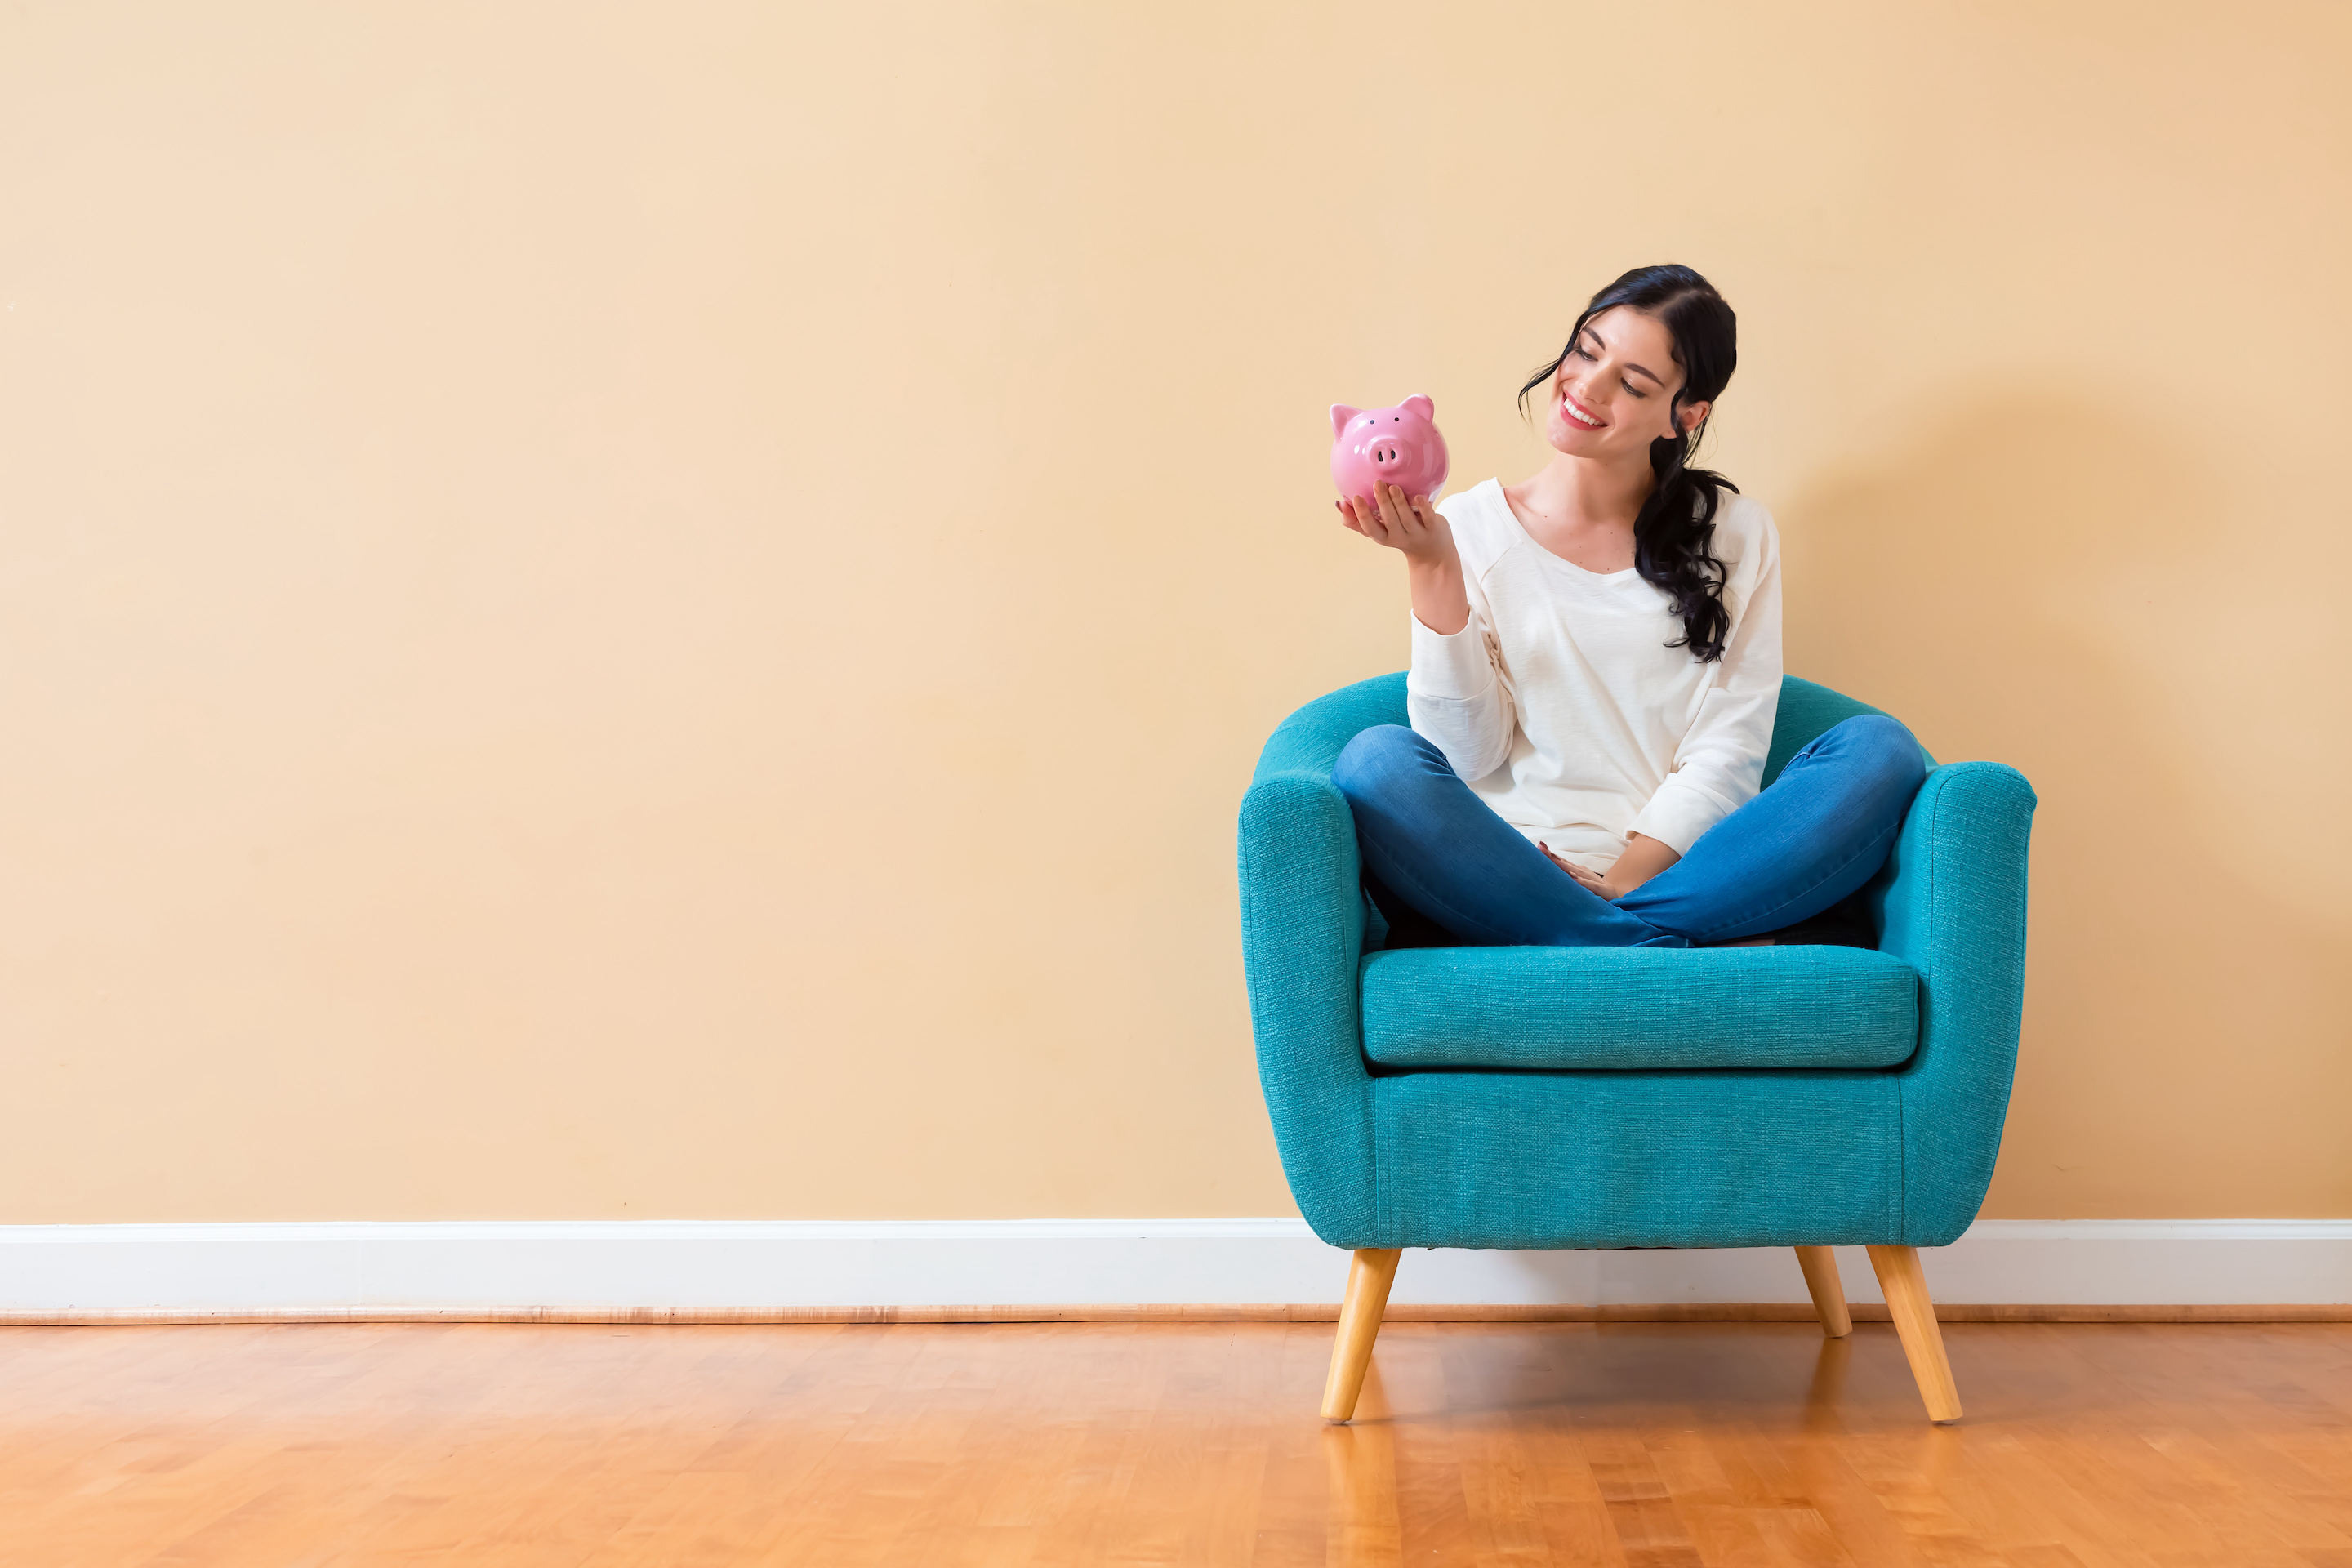 How to be a savvy saver as a renter